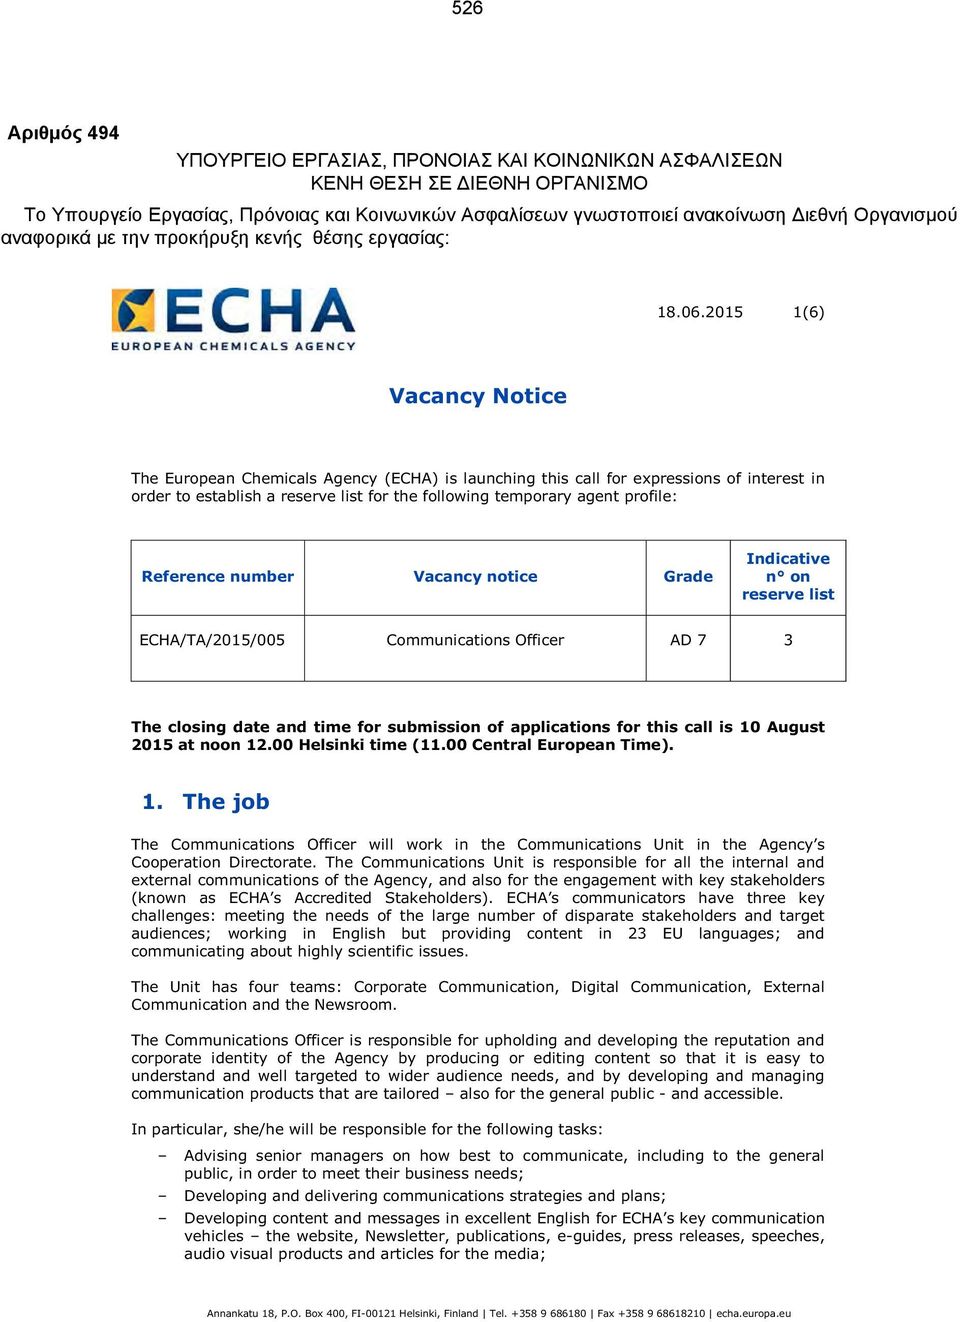 2015 1(6) Vacancy Notice The European Chemicals Agency (ECHA) is launching this call for expressions of interest in order to establish a reserve list for the following temporary agent profile: